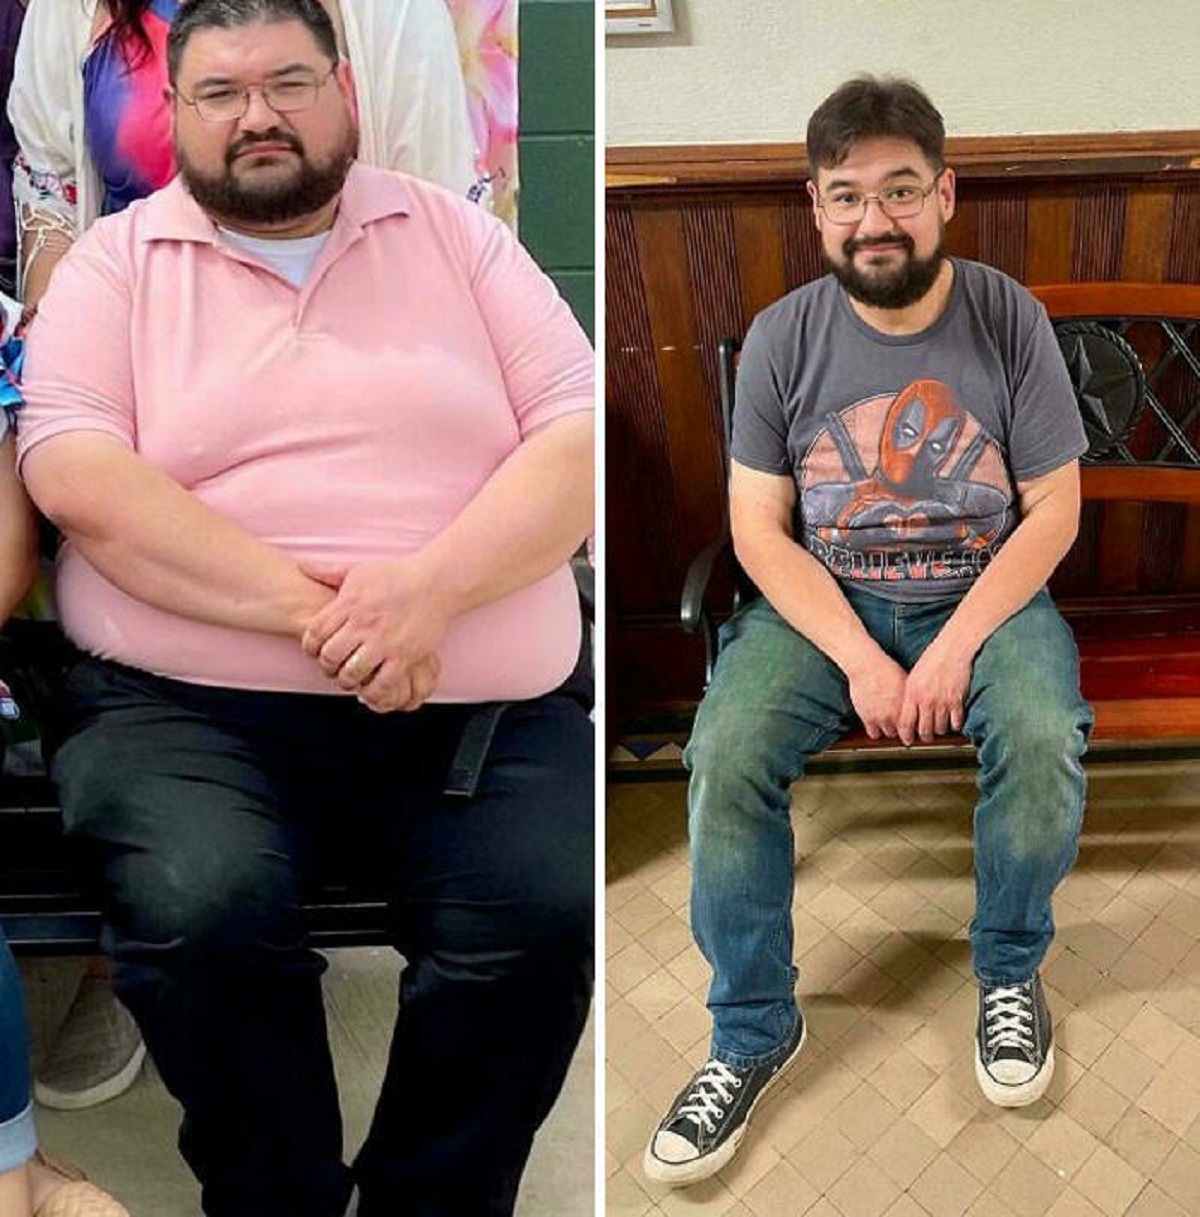 "I Recently Lost 170 Pounds. Took Me Two And A Half Years"